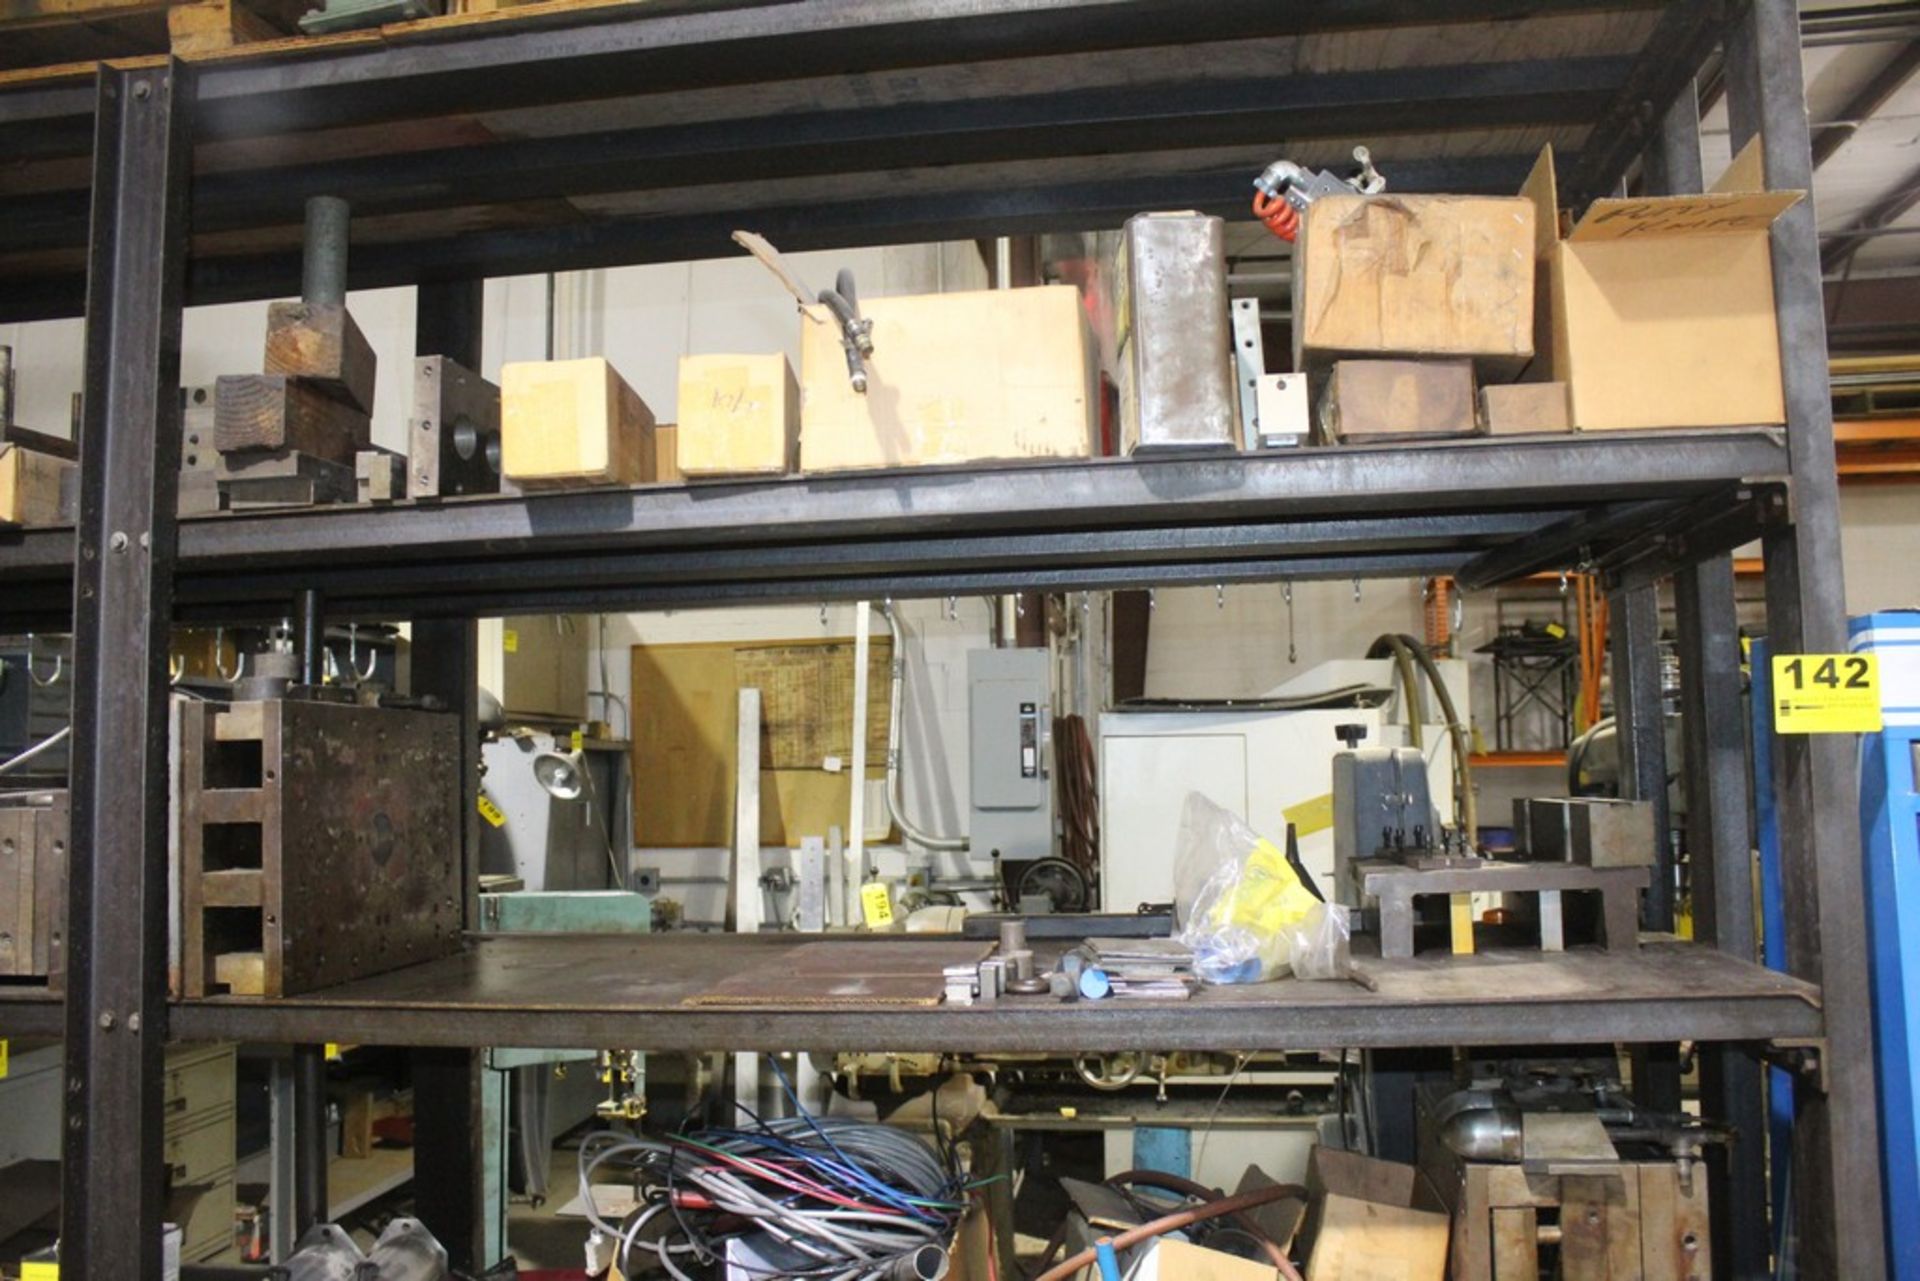 LARGE STEEL MOLD DIES AND ACCESSORIES ON (8) LOWER SHELVES - Image 5 of 6